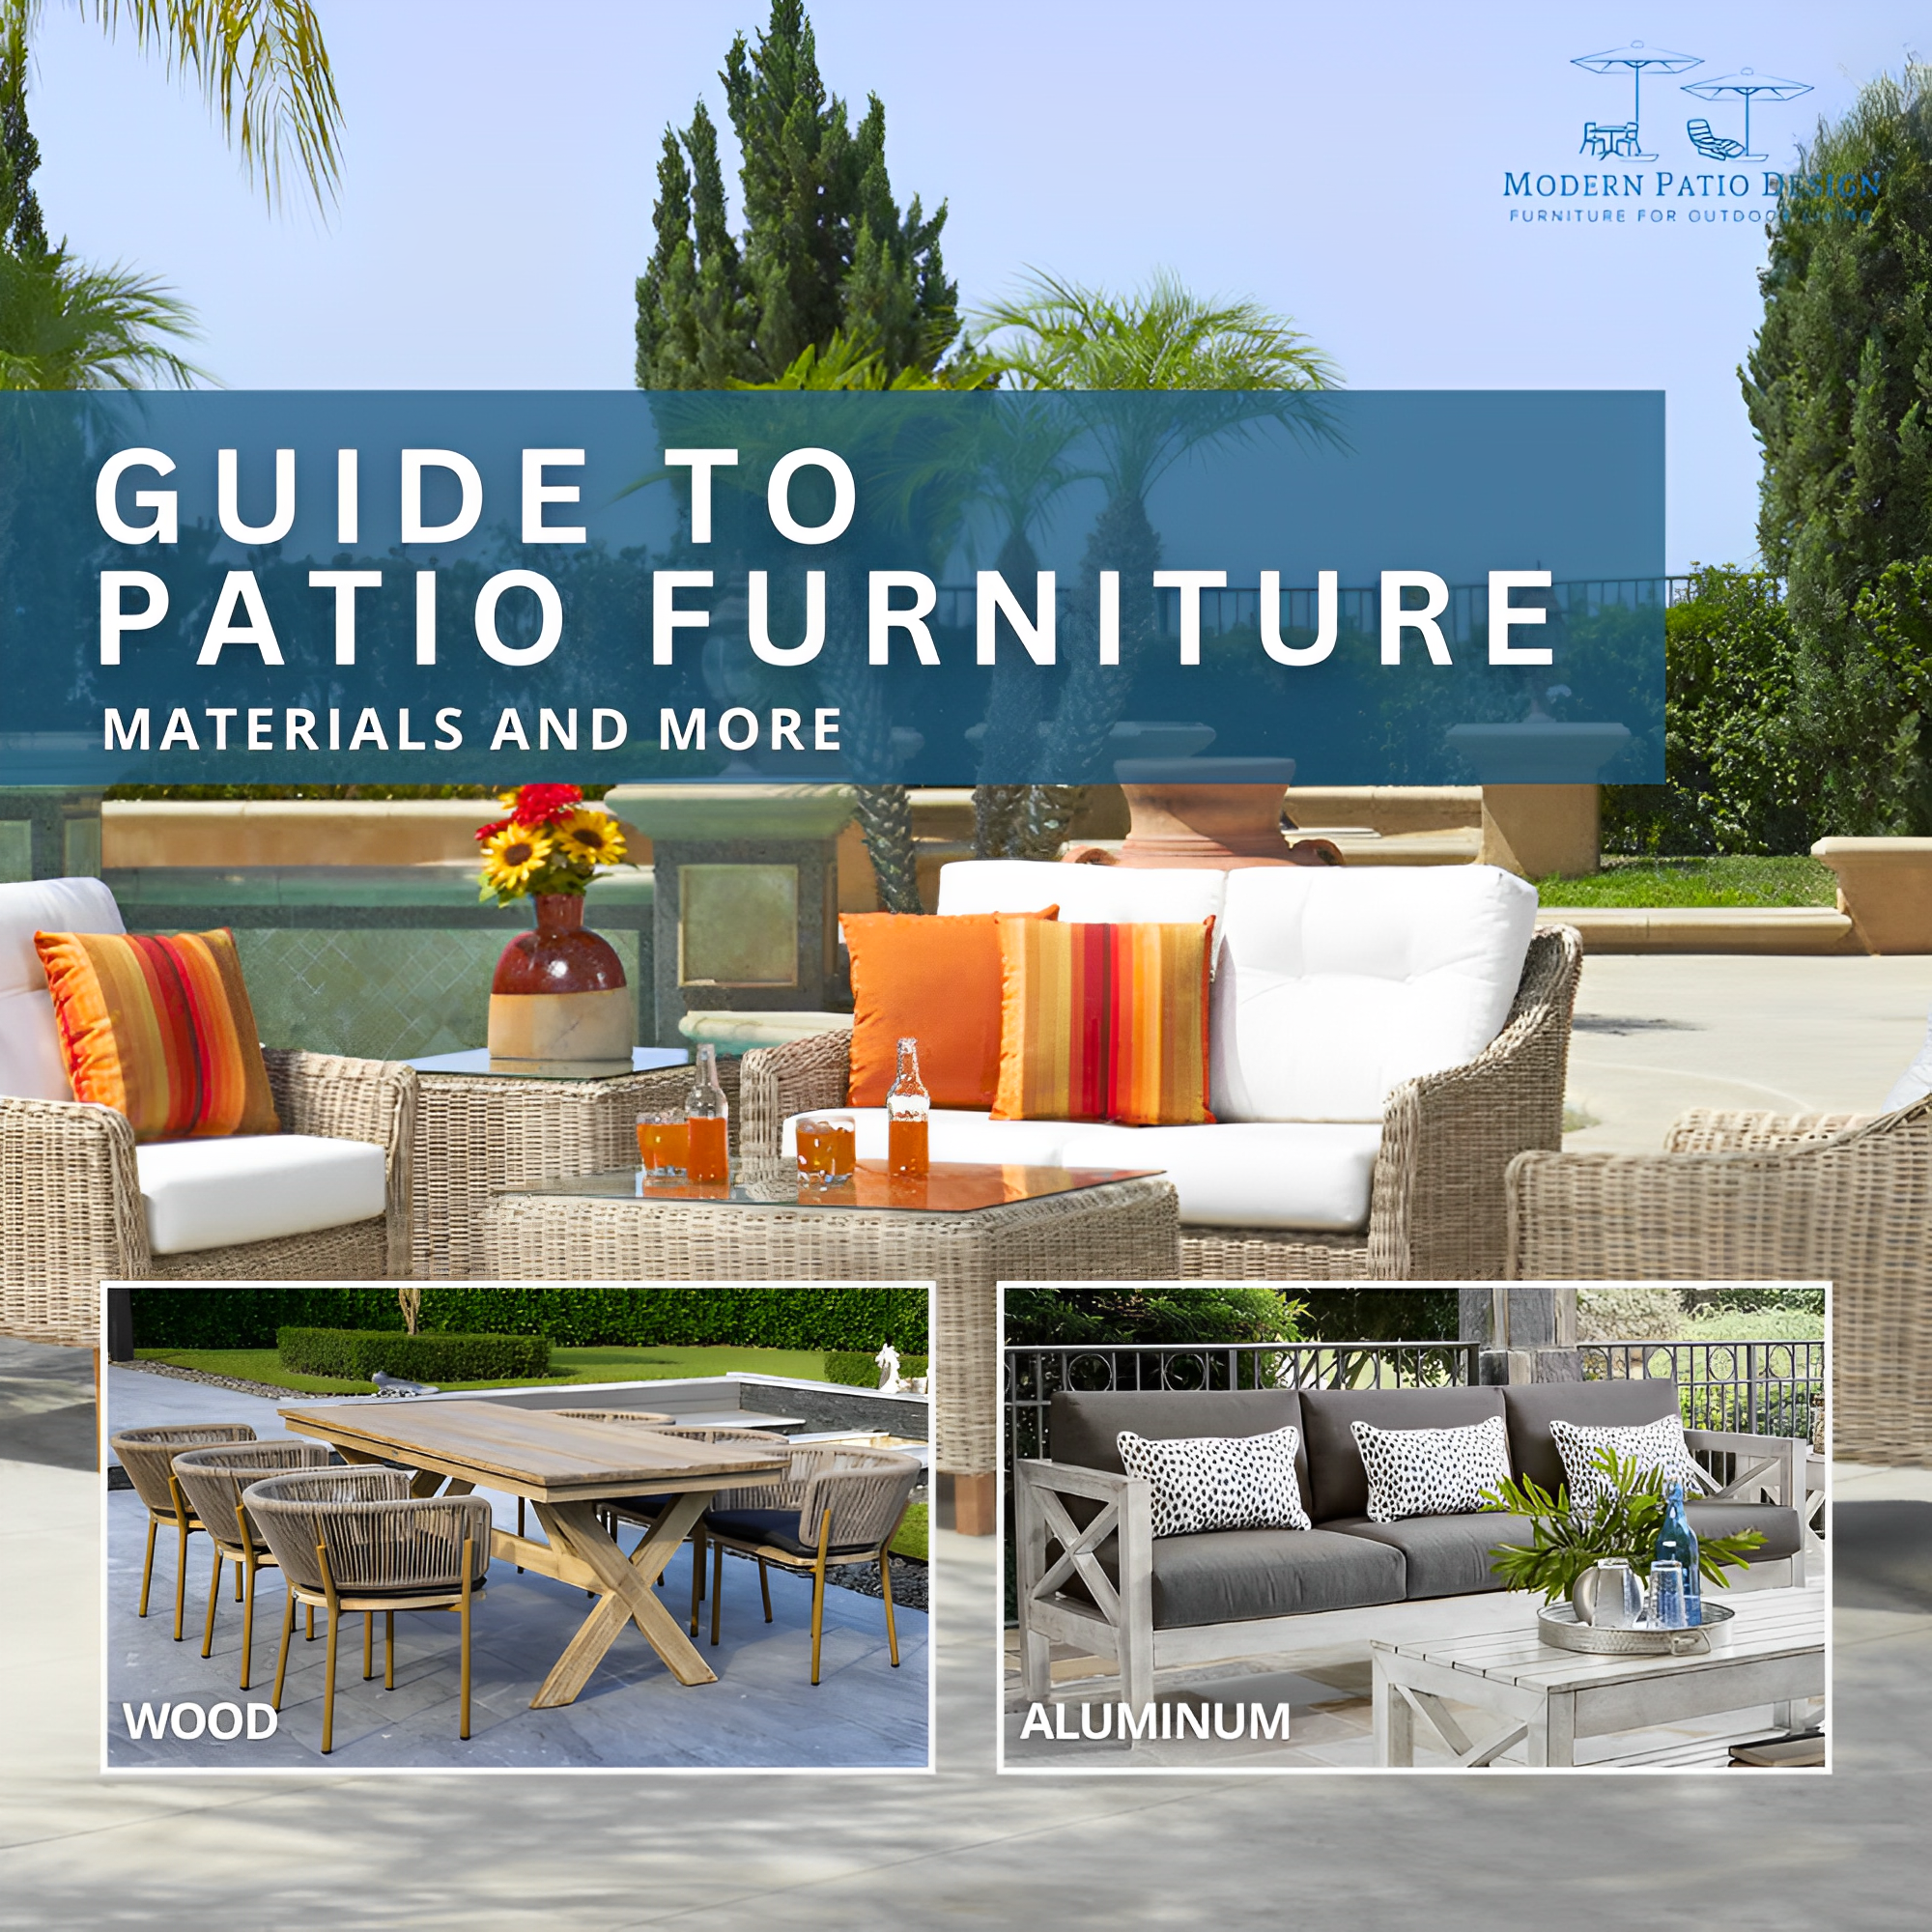 Guide to Patio Furniture: Materials and More